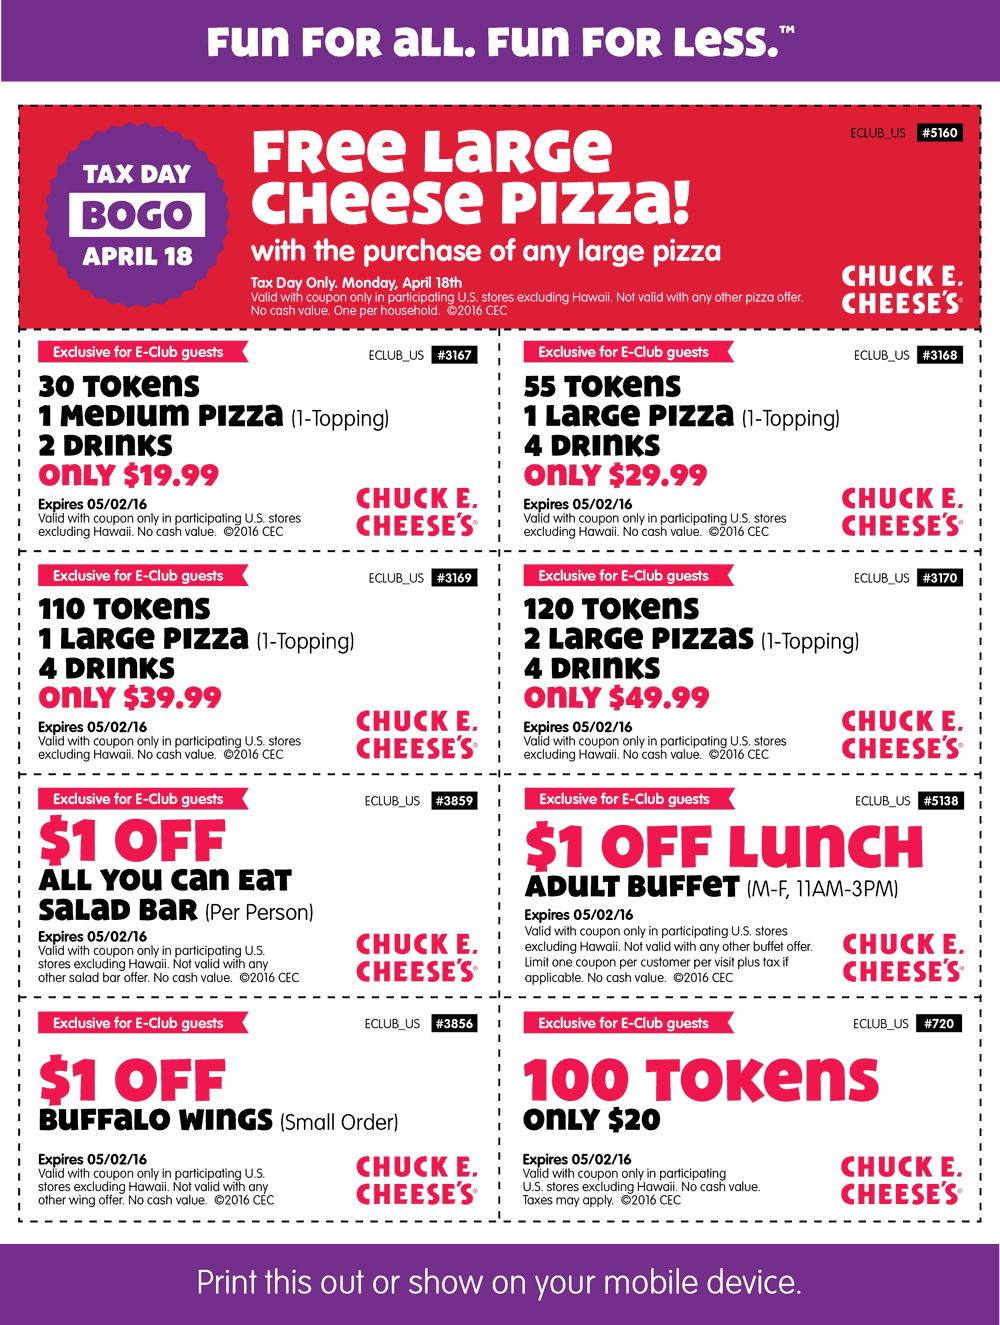 Chuck E Cheese Coupons in Houston, TX